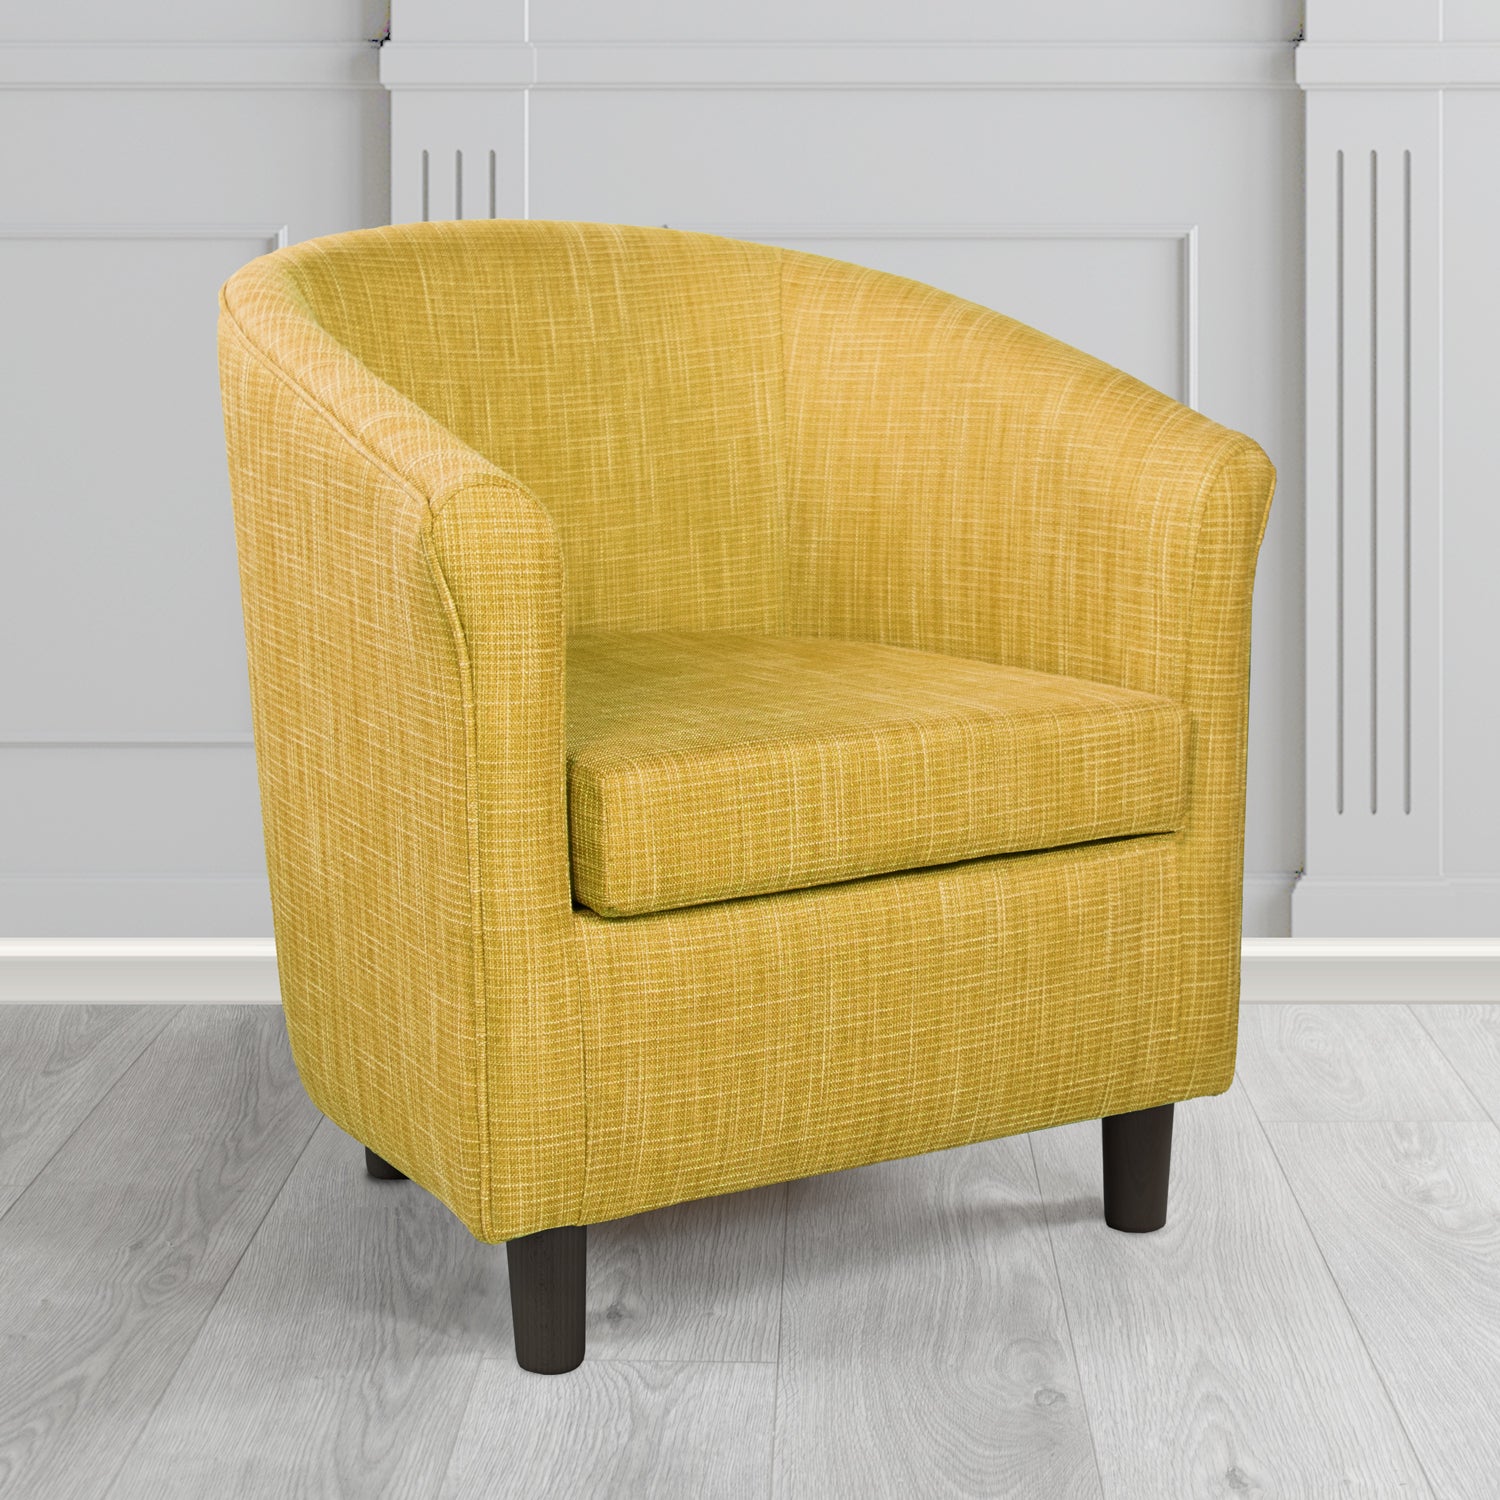 Tuscany Ravel Naples Contract Crib 5 Fabric Tub Chair - Antimicrobial & Water-Resistant - The Tub Chair Shop